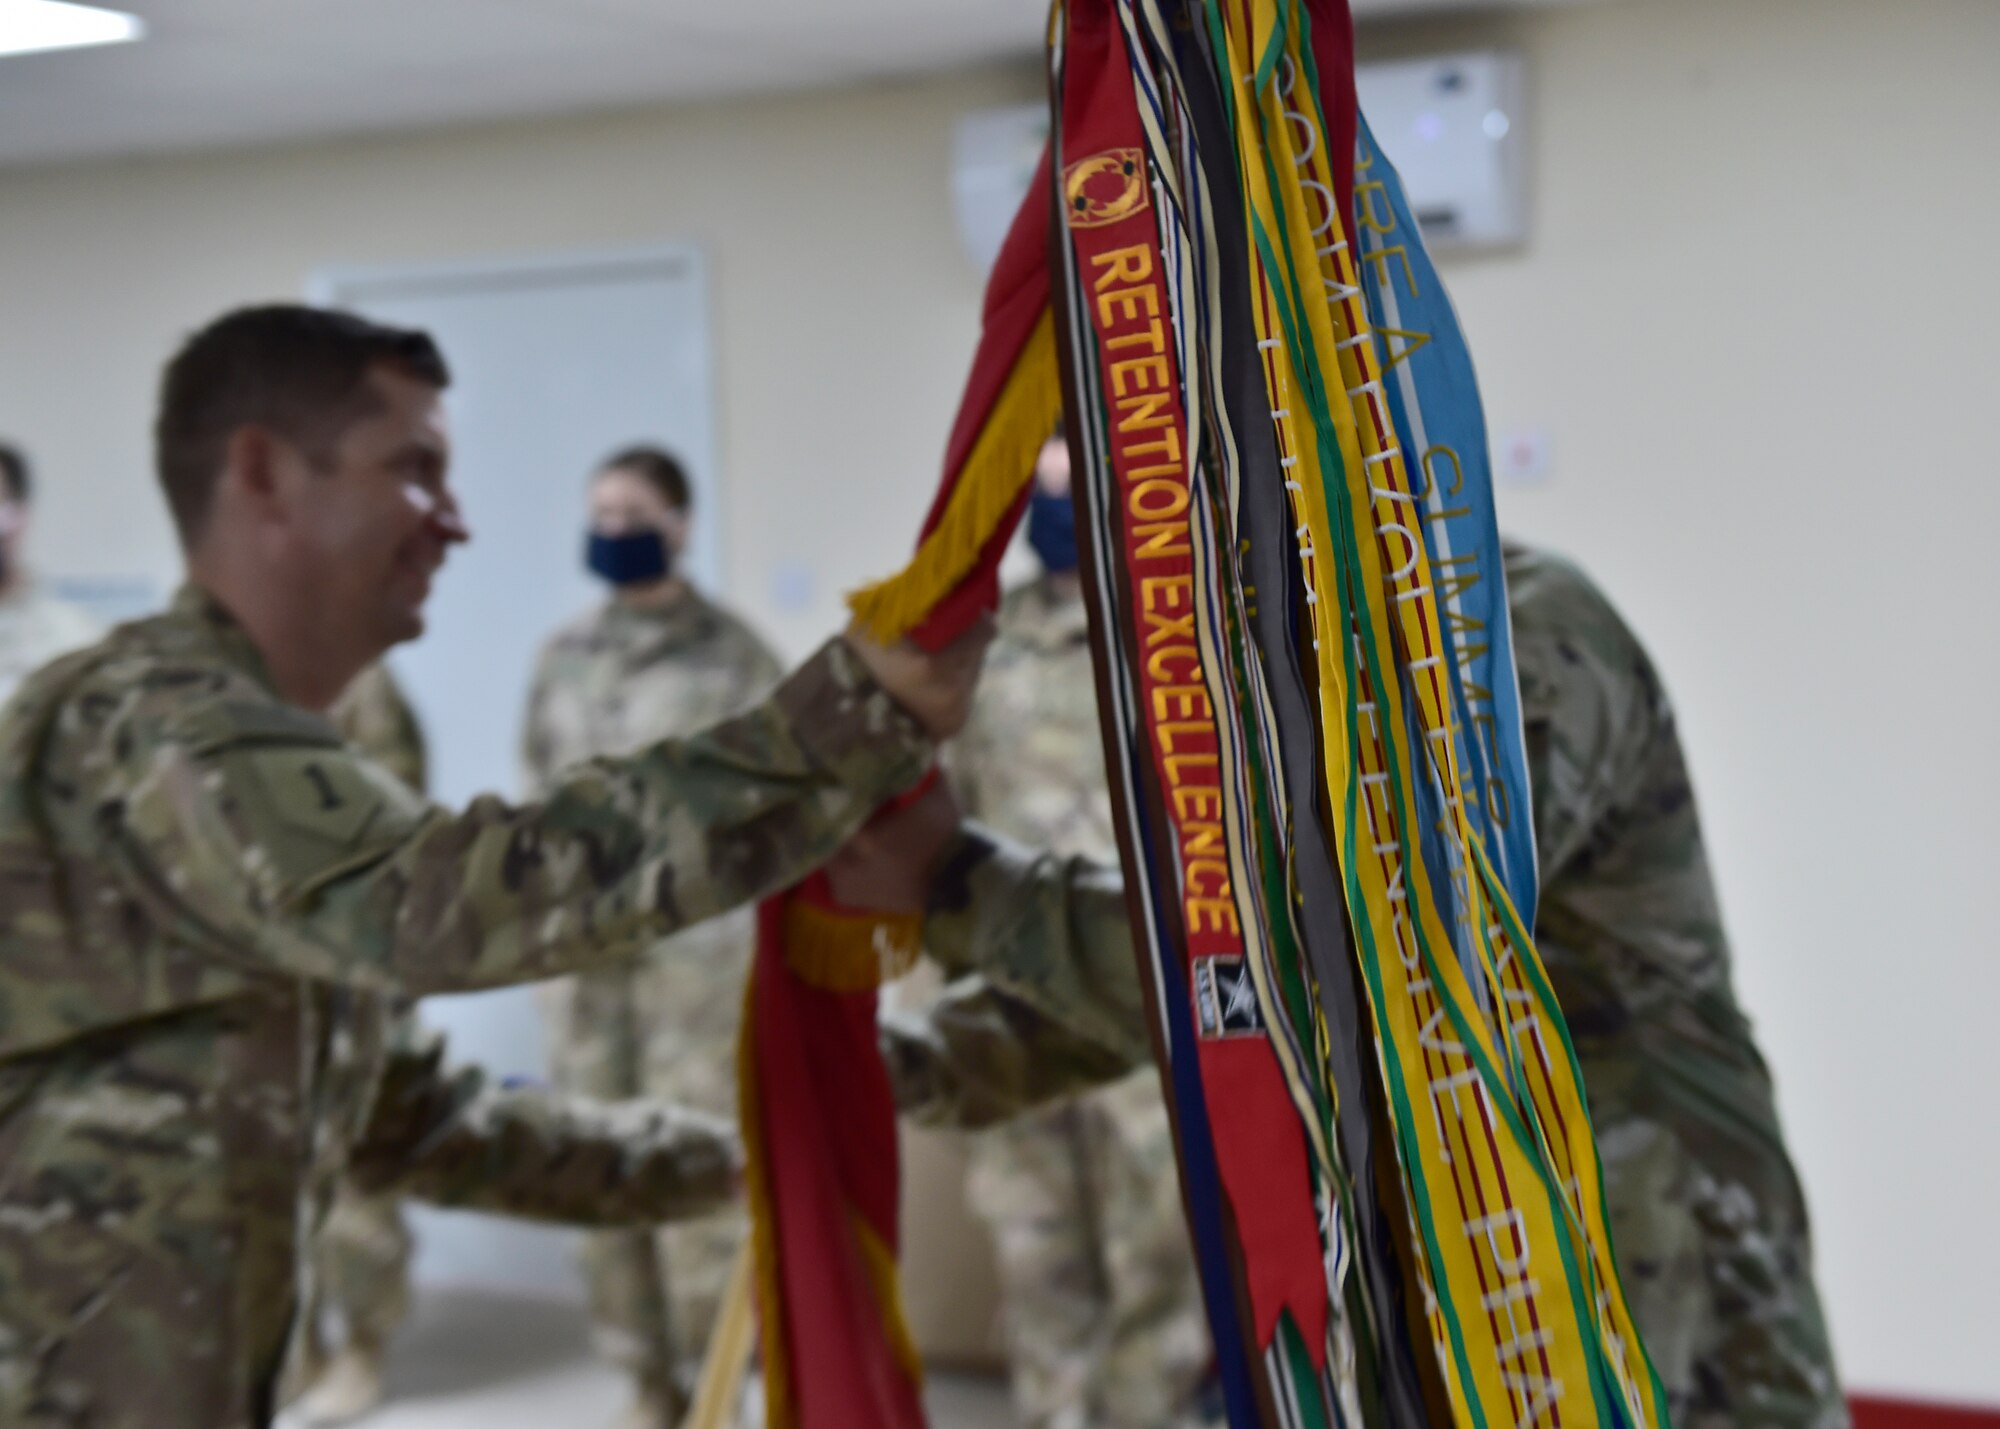 U.S. Army CSM Seagram Porter, outgoing command sergeant major, relinquishes responsibility of the 4-5 Air Defense Artillery Regiment to CSM Tomas Barrios during a Change of Responsibility Ceremony at Prince Sultan Air Base, Kingdom of Saudi Arabia.